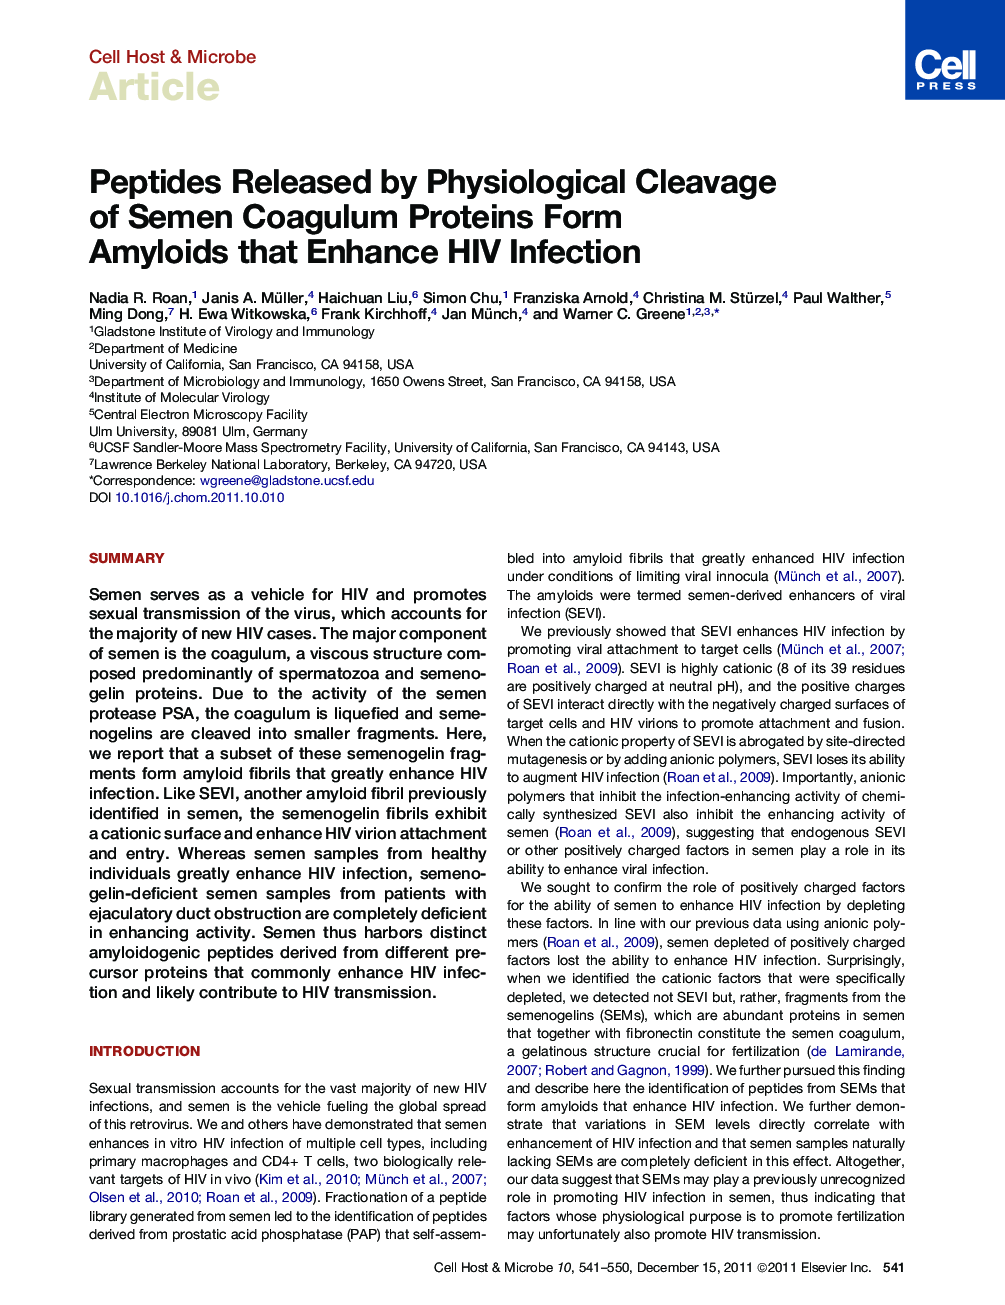 Peptides Released by Physiological Cleavage of Semen Coagulum Proteins Form Amyloids that Enhance HIV Infection